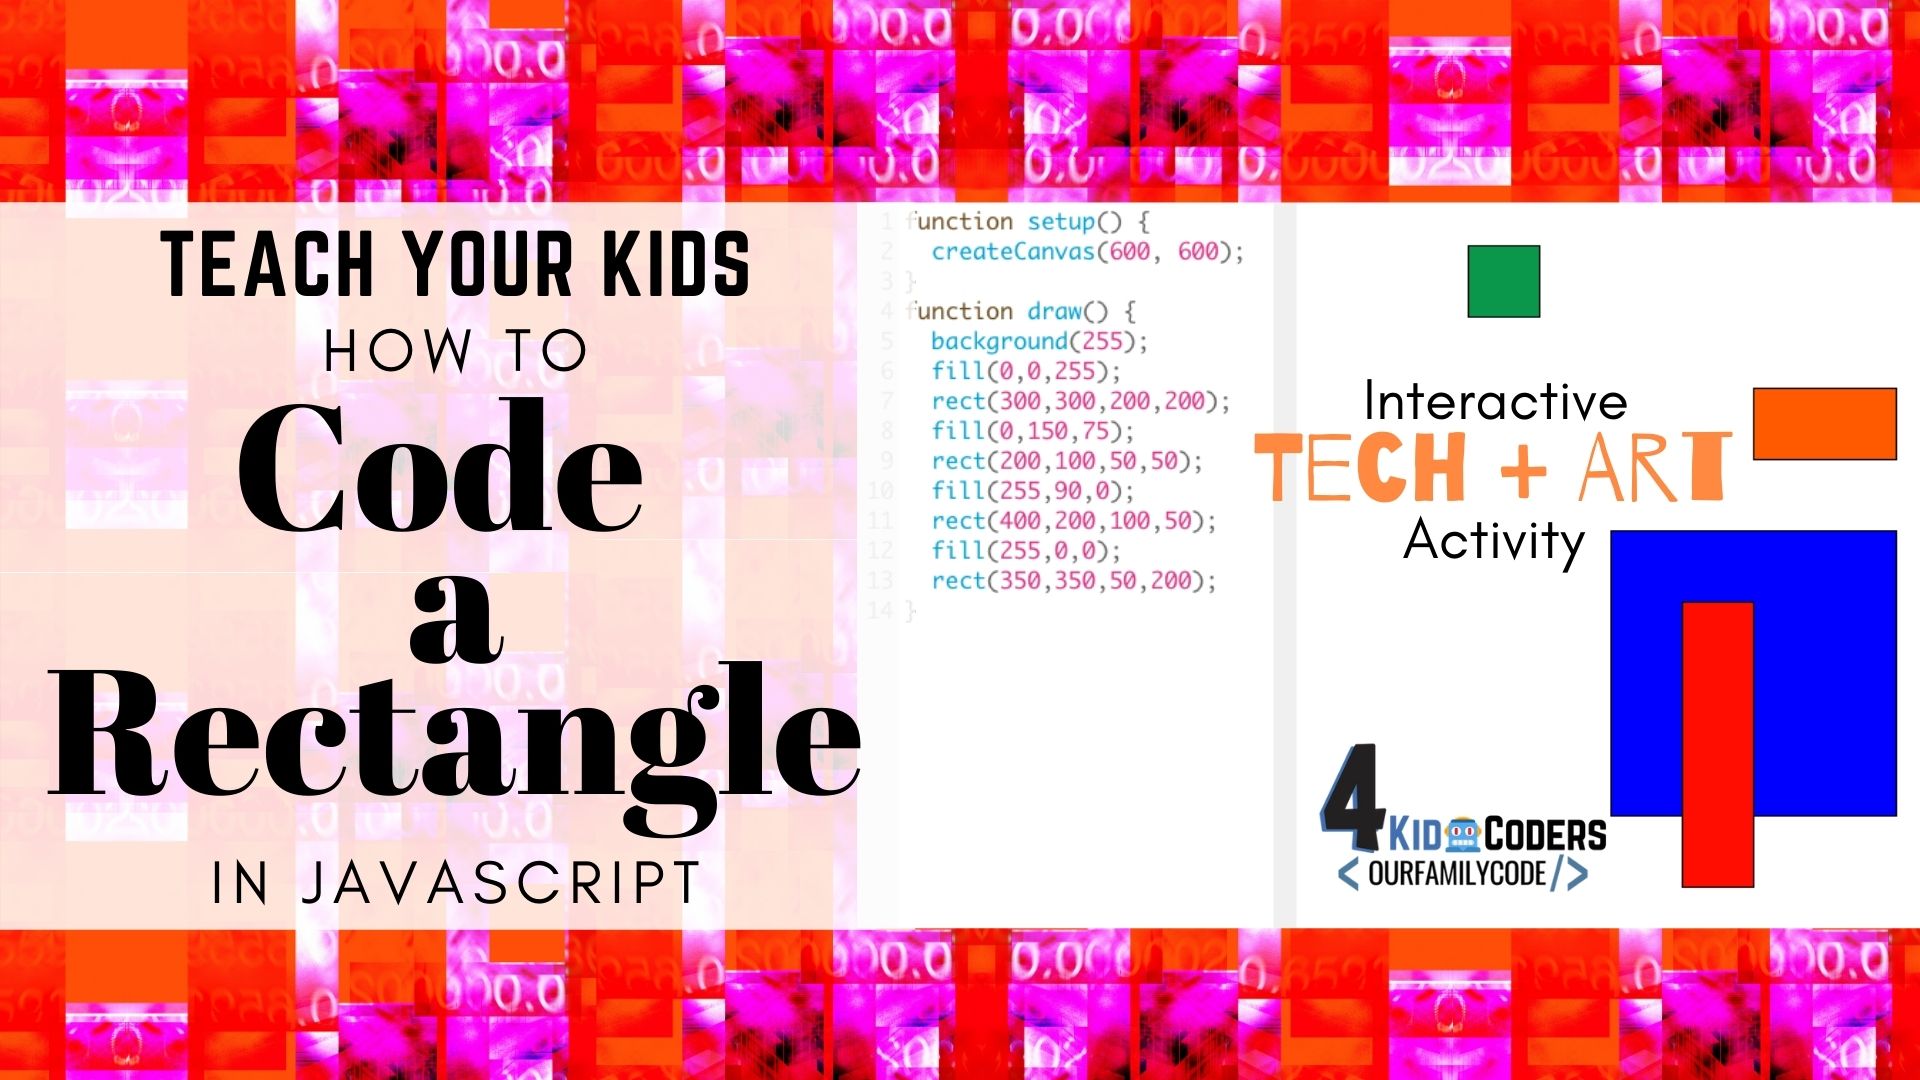 Teach your kids to code a rectangle in JavaScript with this hands-on, interactive coding activity! #teachkidstocode #p5js #codingart #homeschool #codinglesson #CSforkids